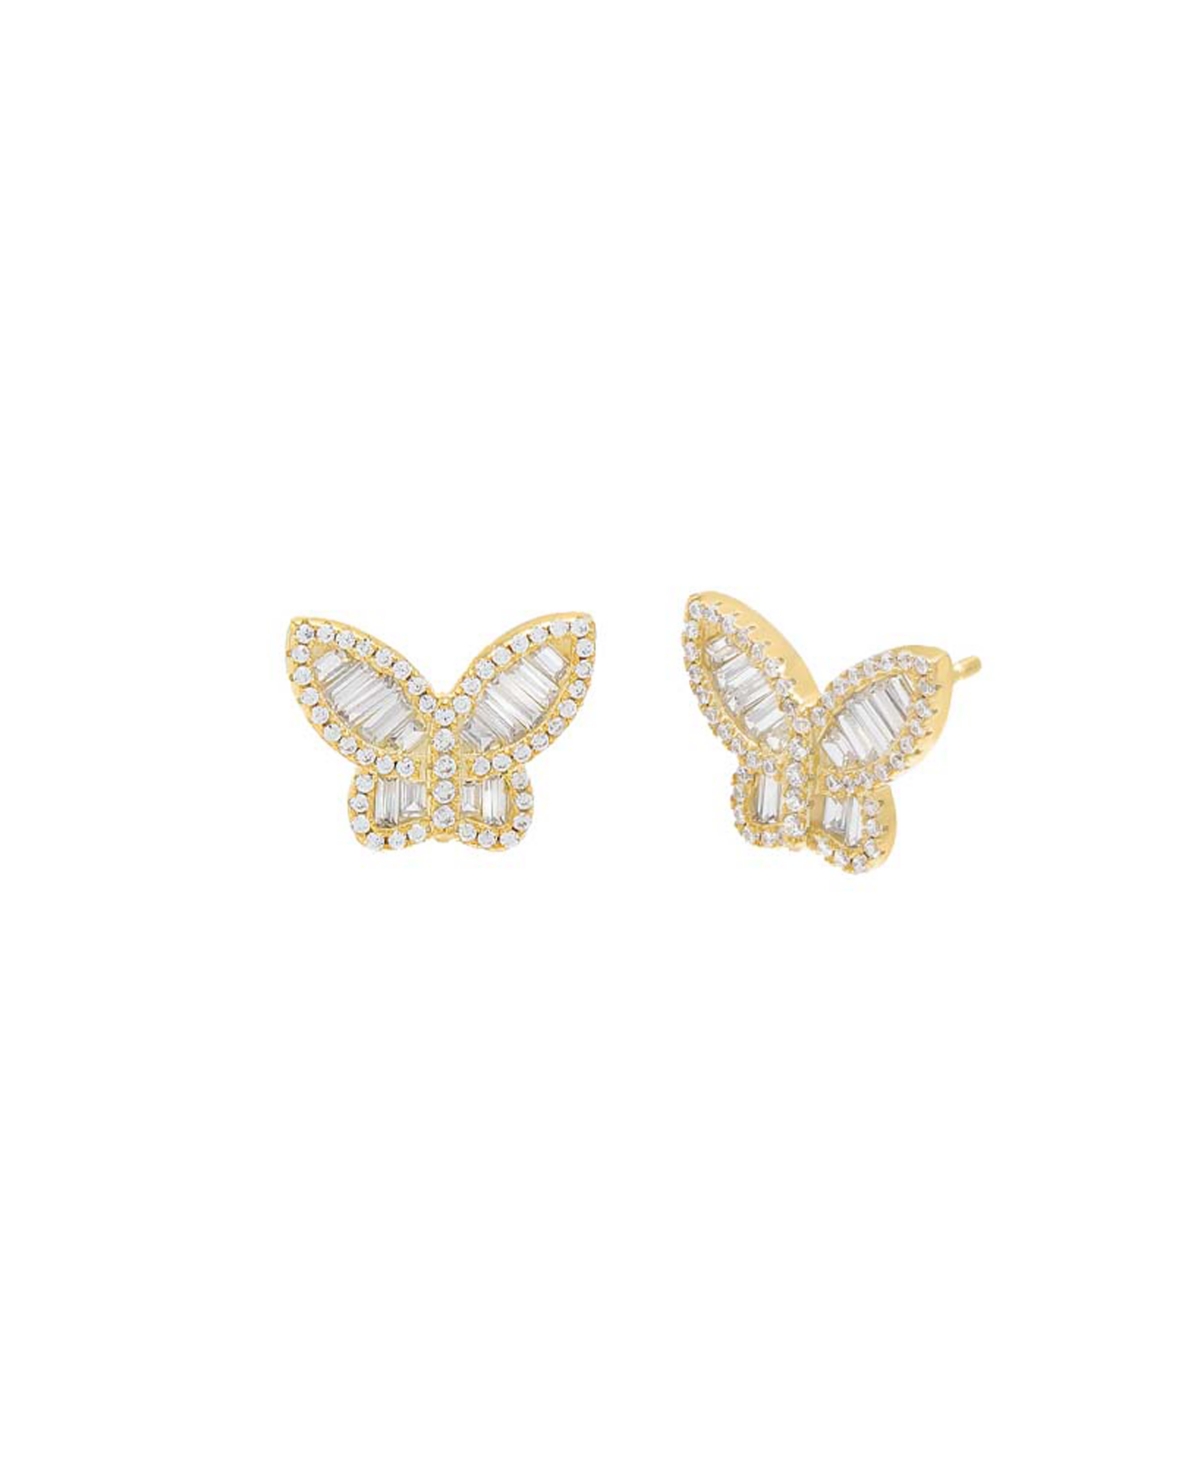 By Adina Eden Pave X Baguette Butterfly Stud Earring In Gold-plated